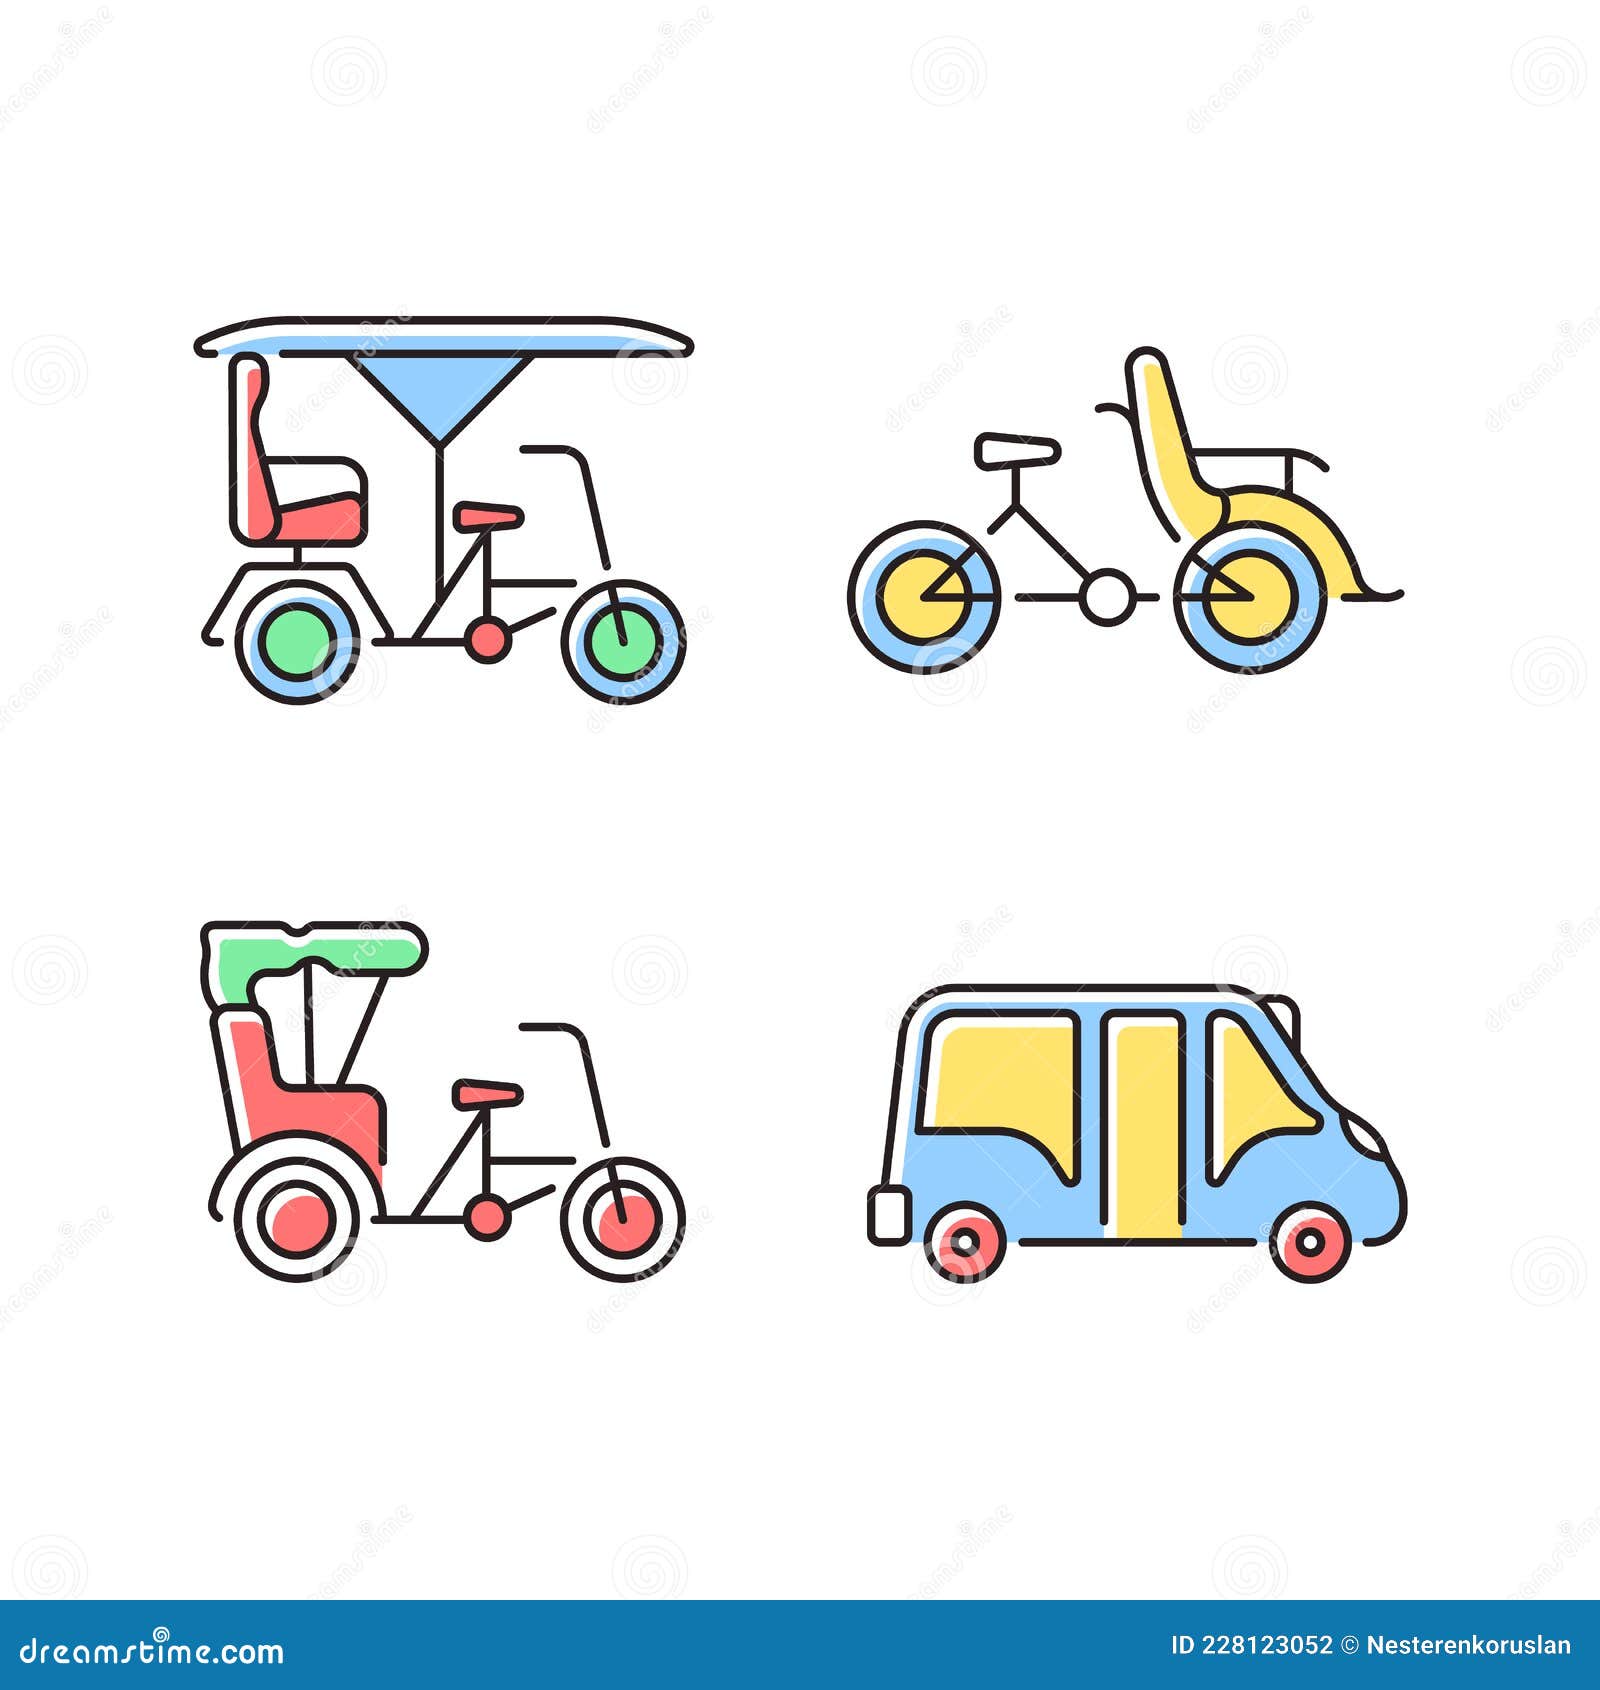 Discover 80+ easy vehicle drawing latest